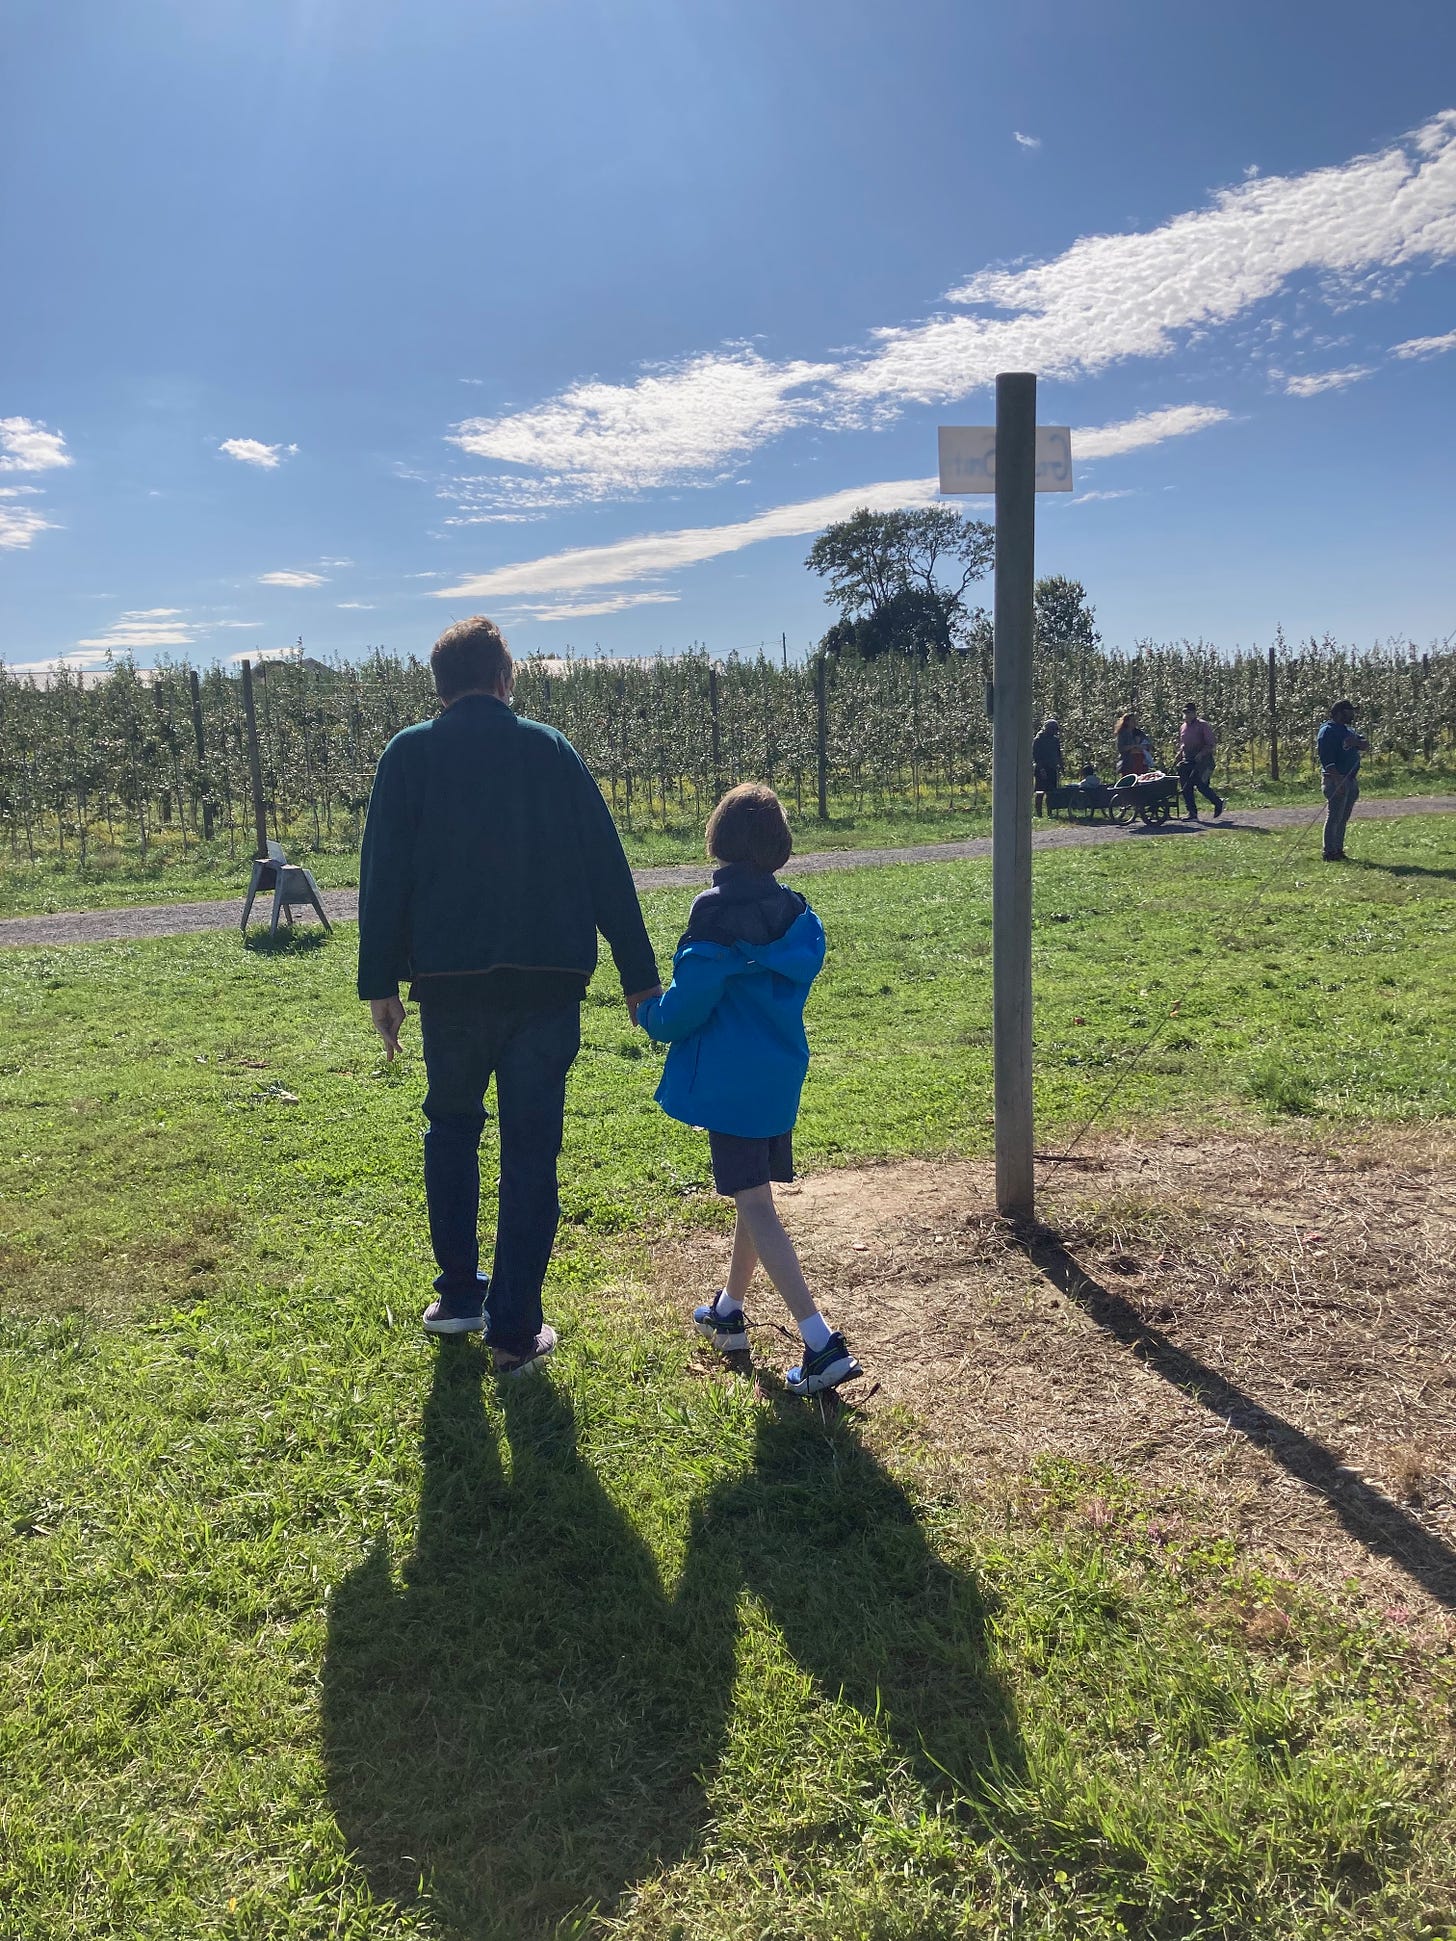 A photo of my husband and older son walking in an apple orchard on a bright, sunny fall day